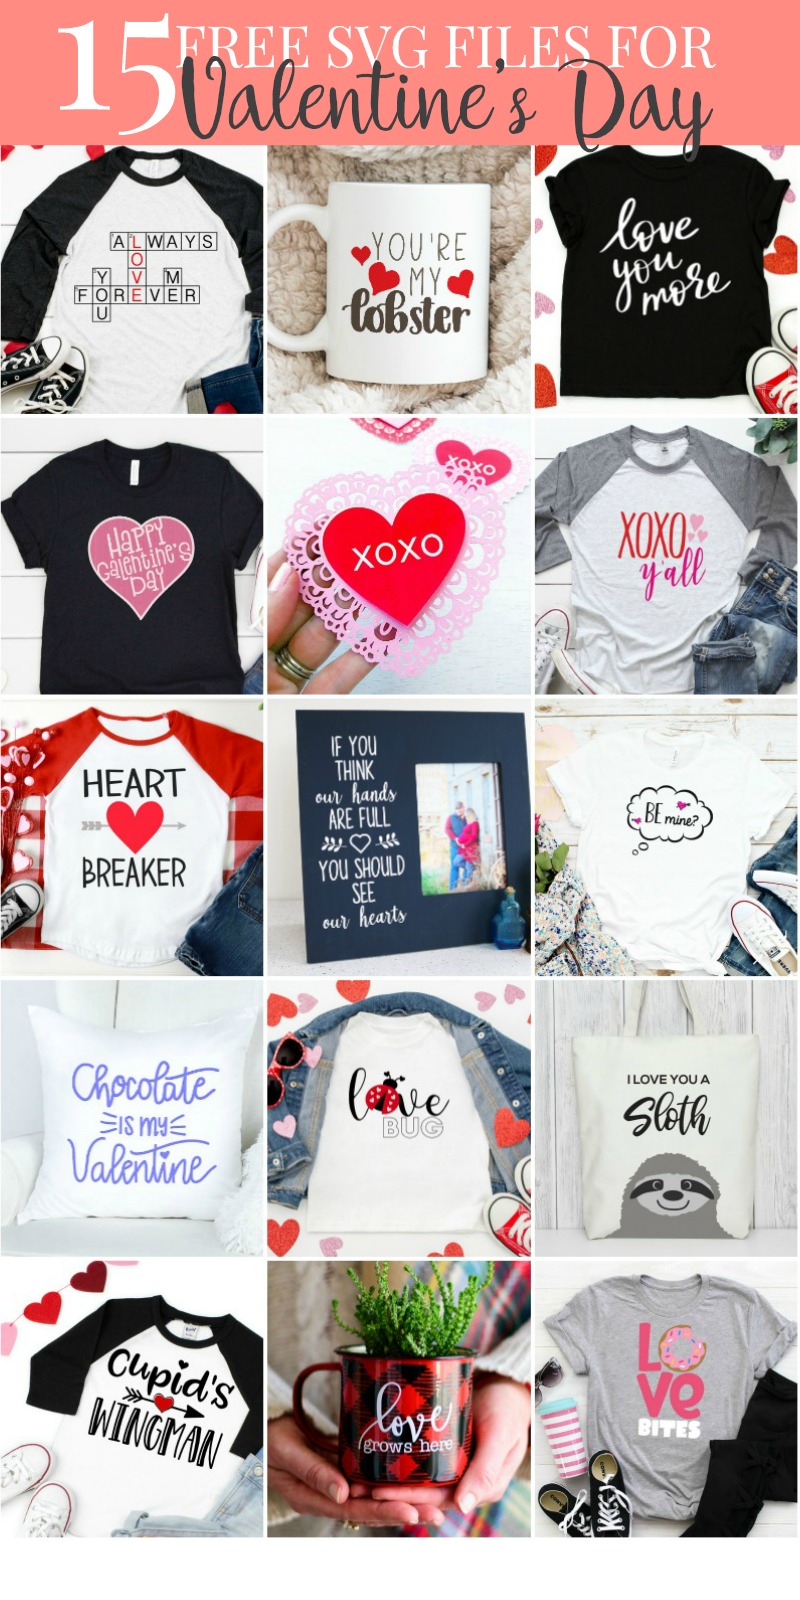 Get these 15 free SVG files for Valentine's Day! A fun way to use your Cricut or Silhouette to make something special! #svg #freesvg #svgfile #cricut #cricutmade #silhouette